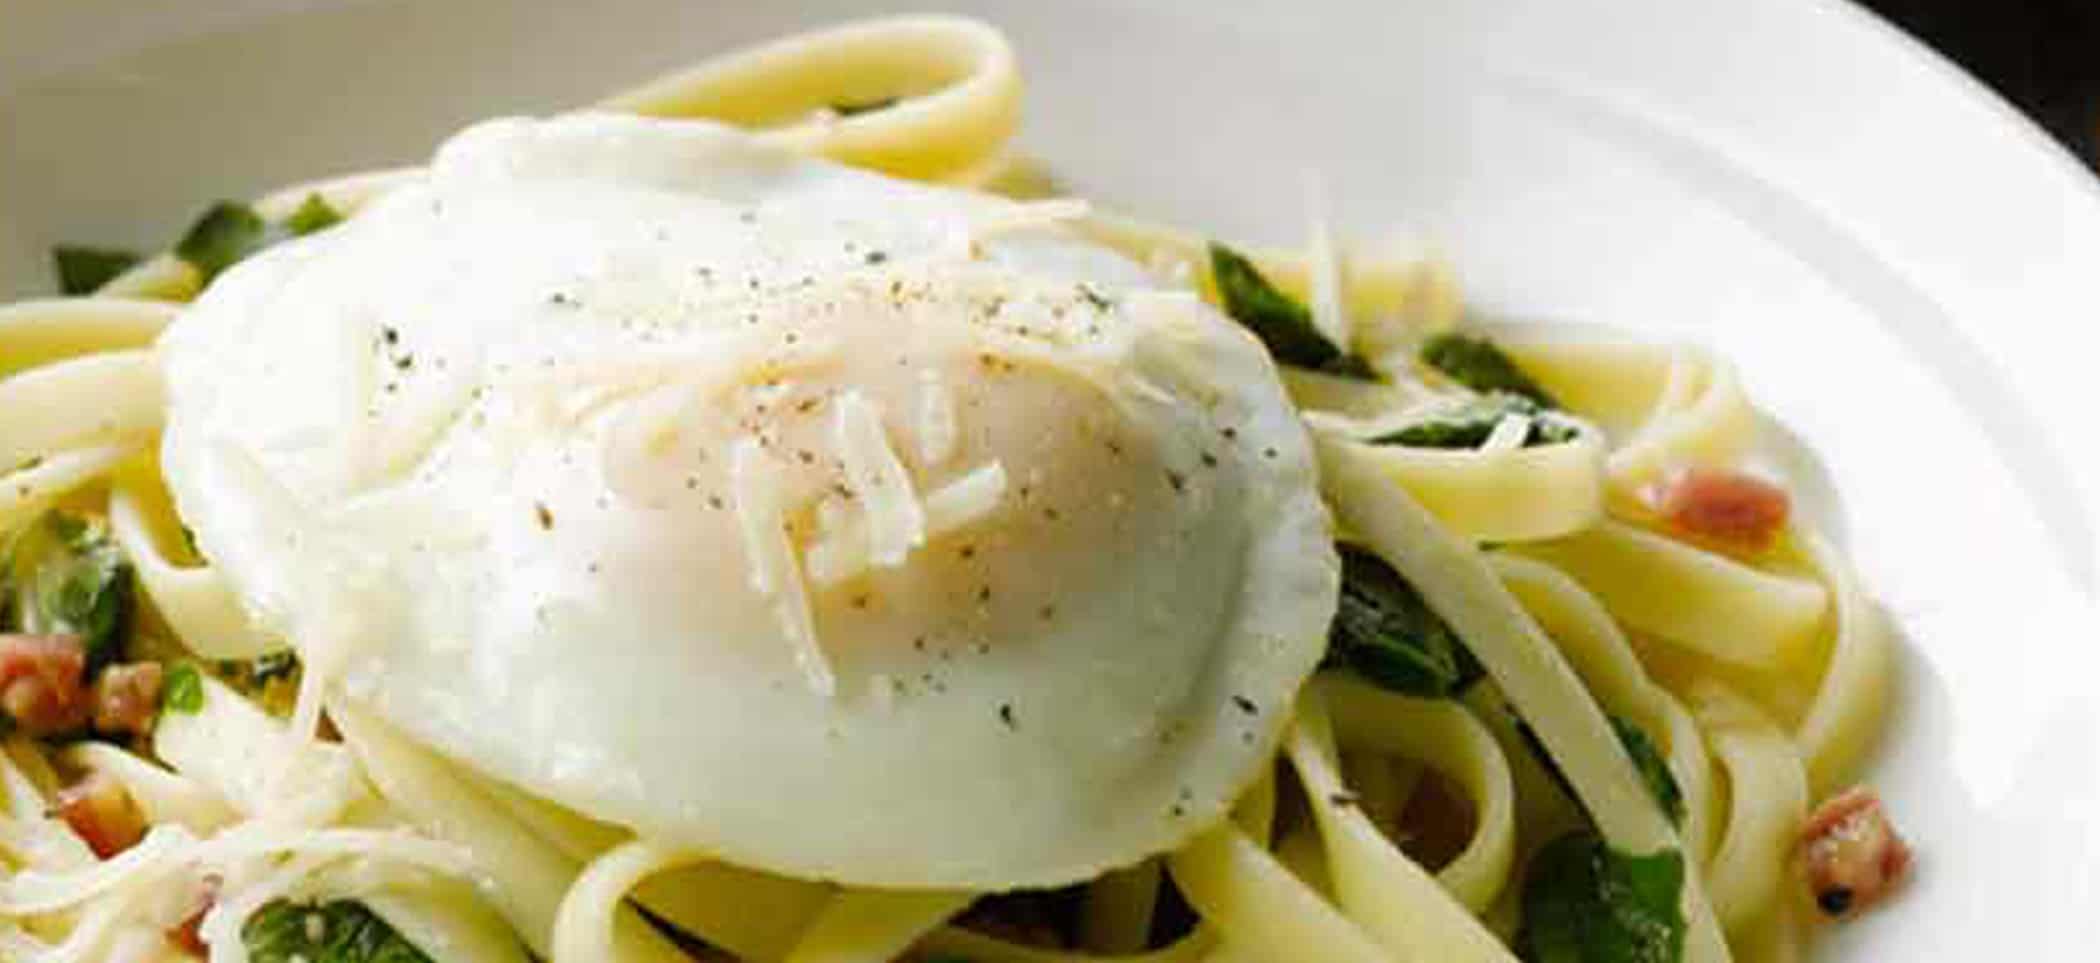 Fettuccine with Pancetta, Chard and Fried Egg